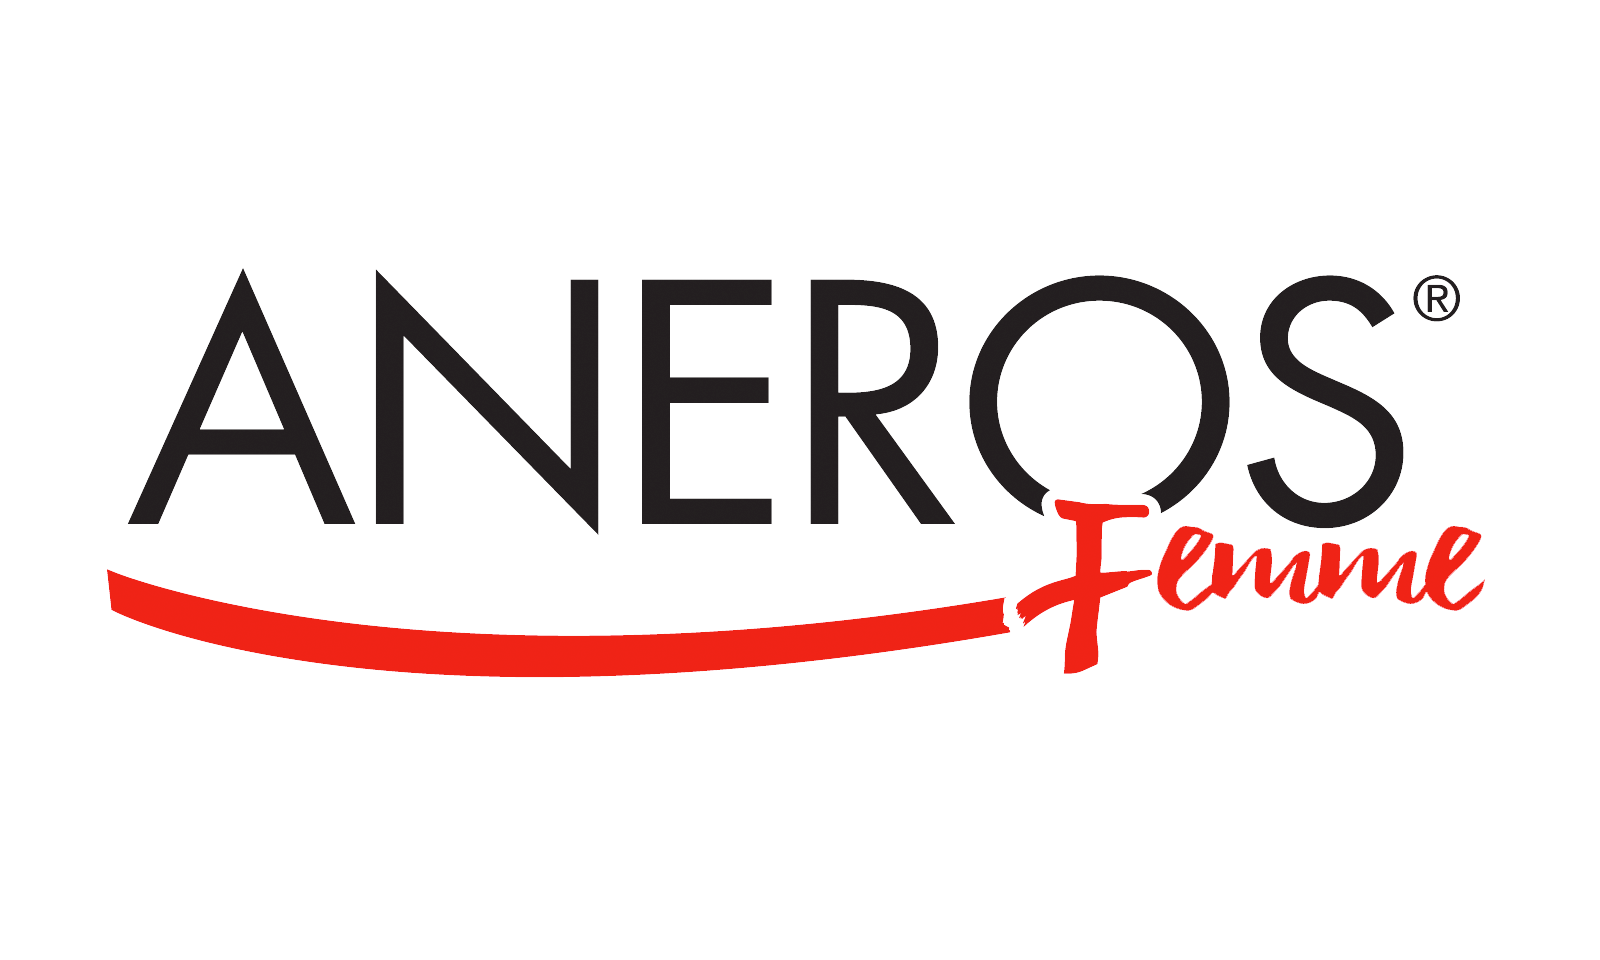 AnerosFemme.com, Dedicated to Women, Launches from Aneros